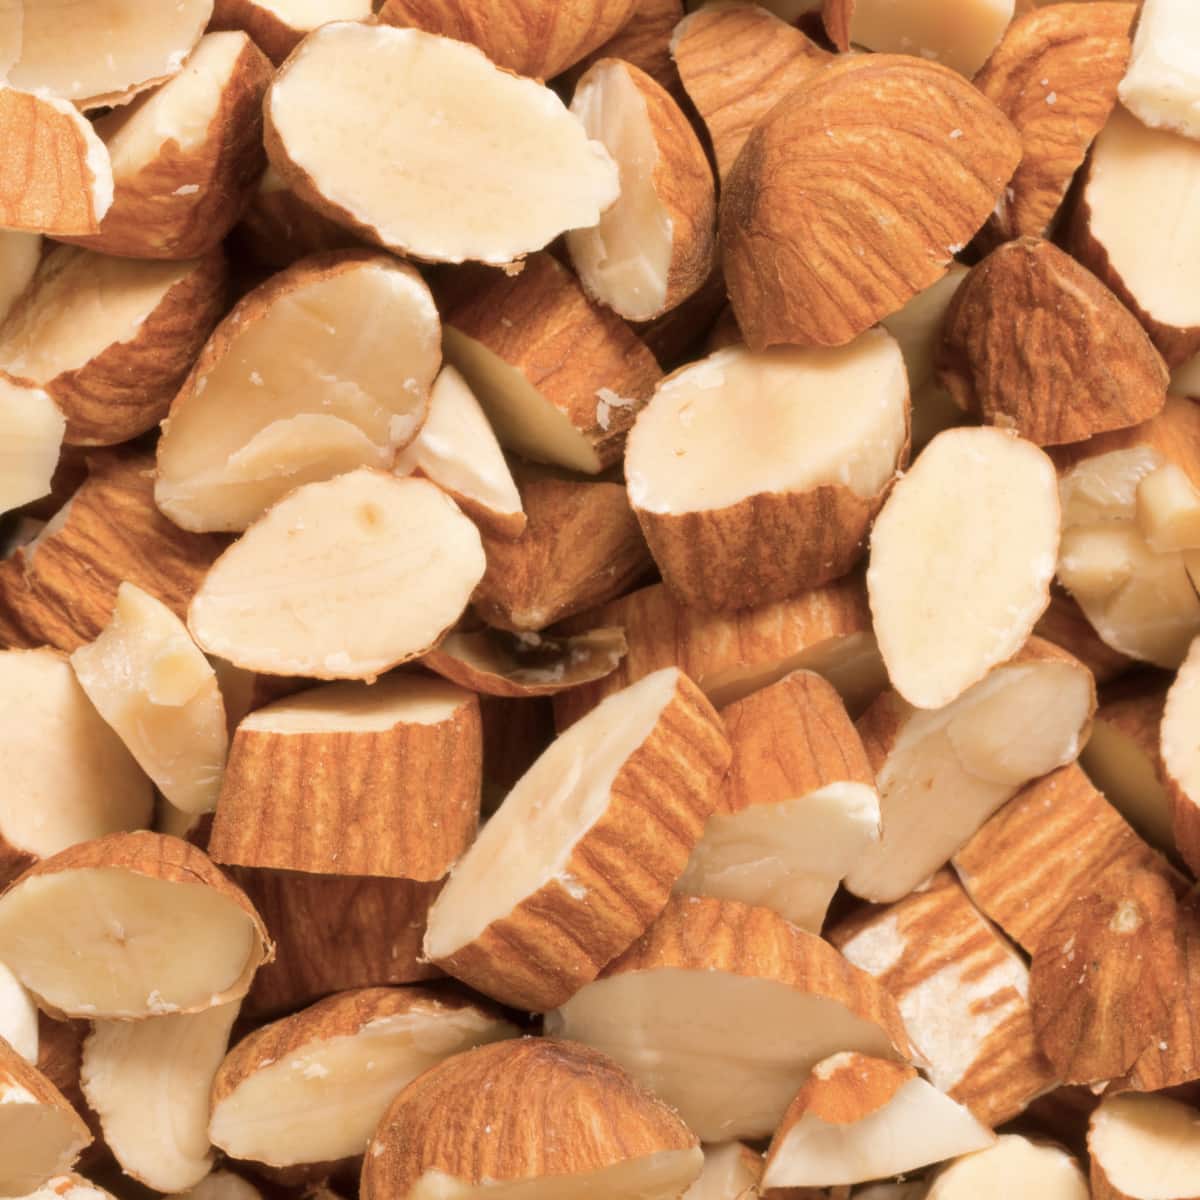 a pile of chopped almonds.